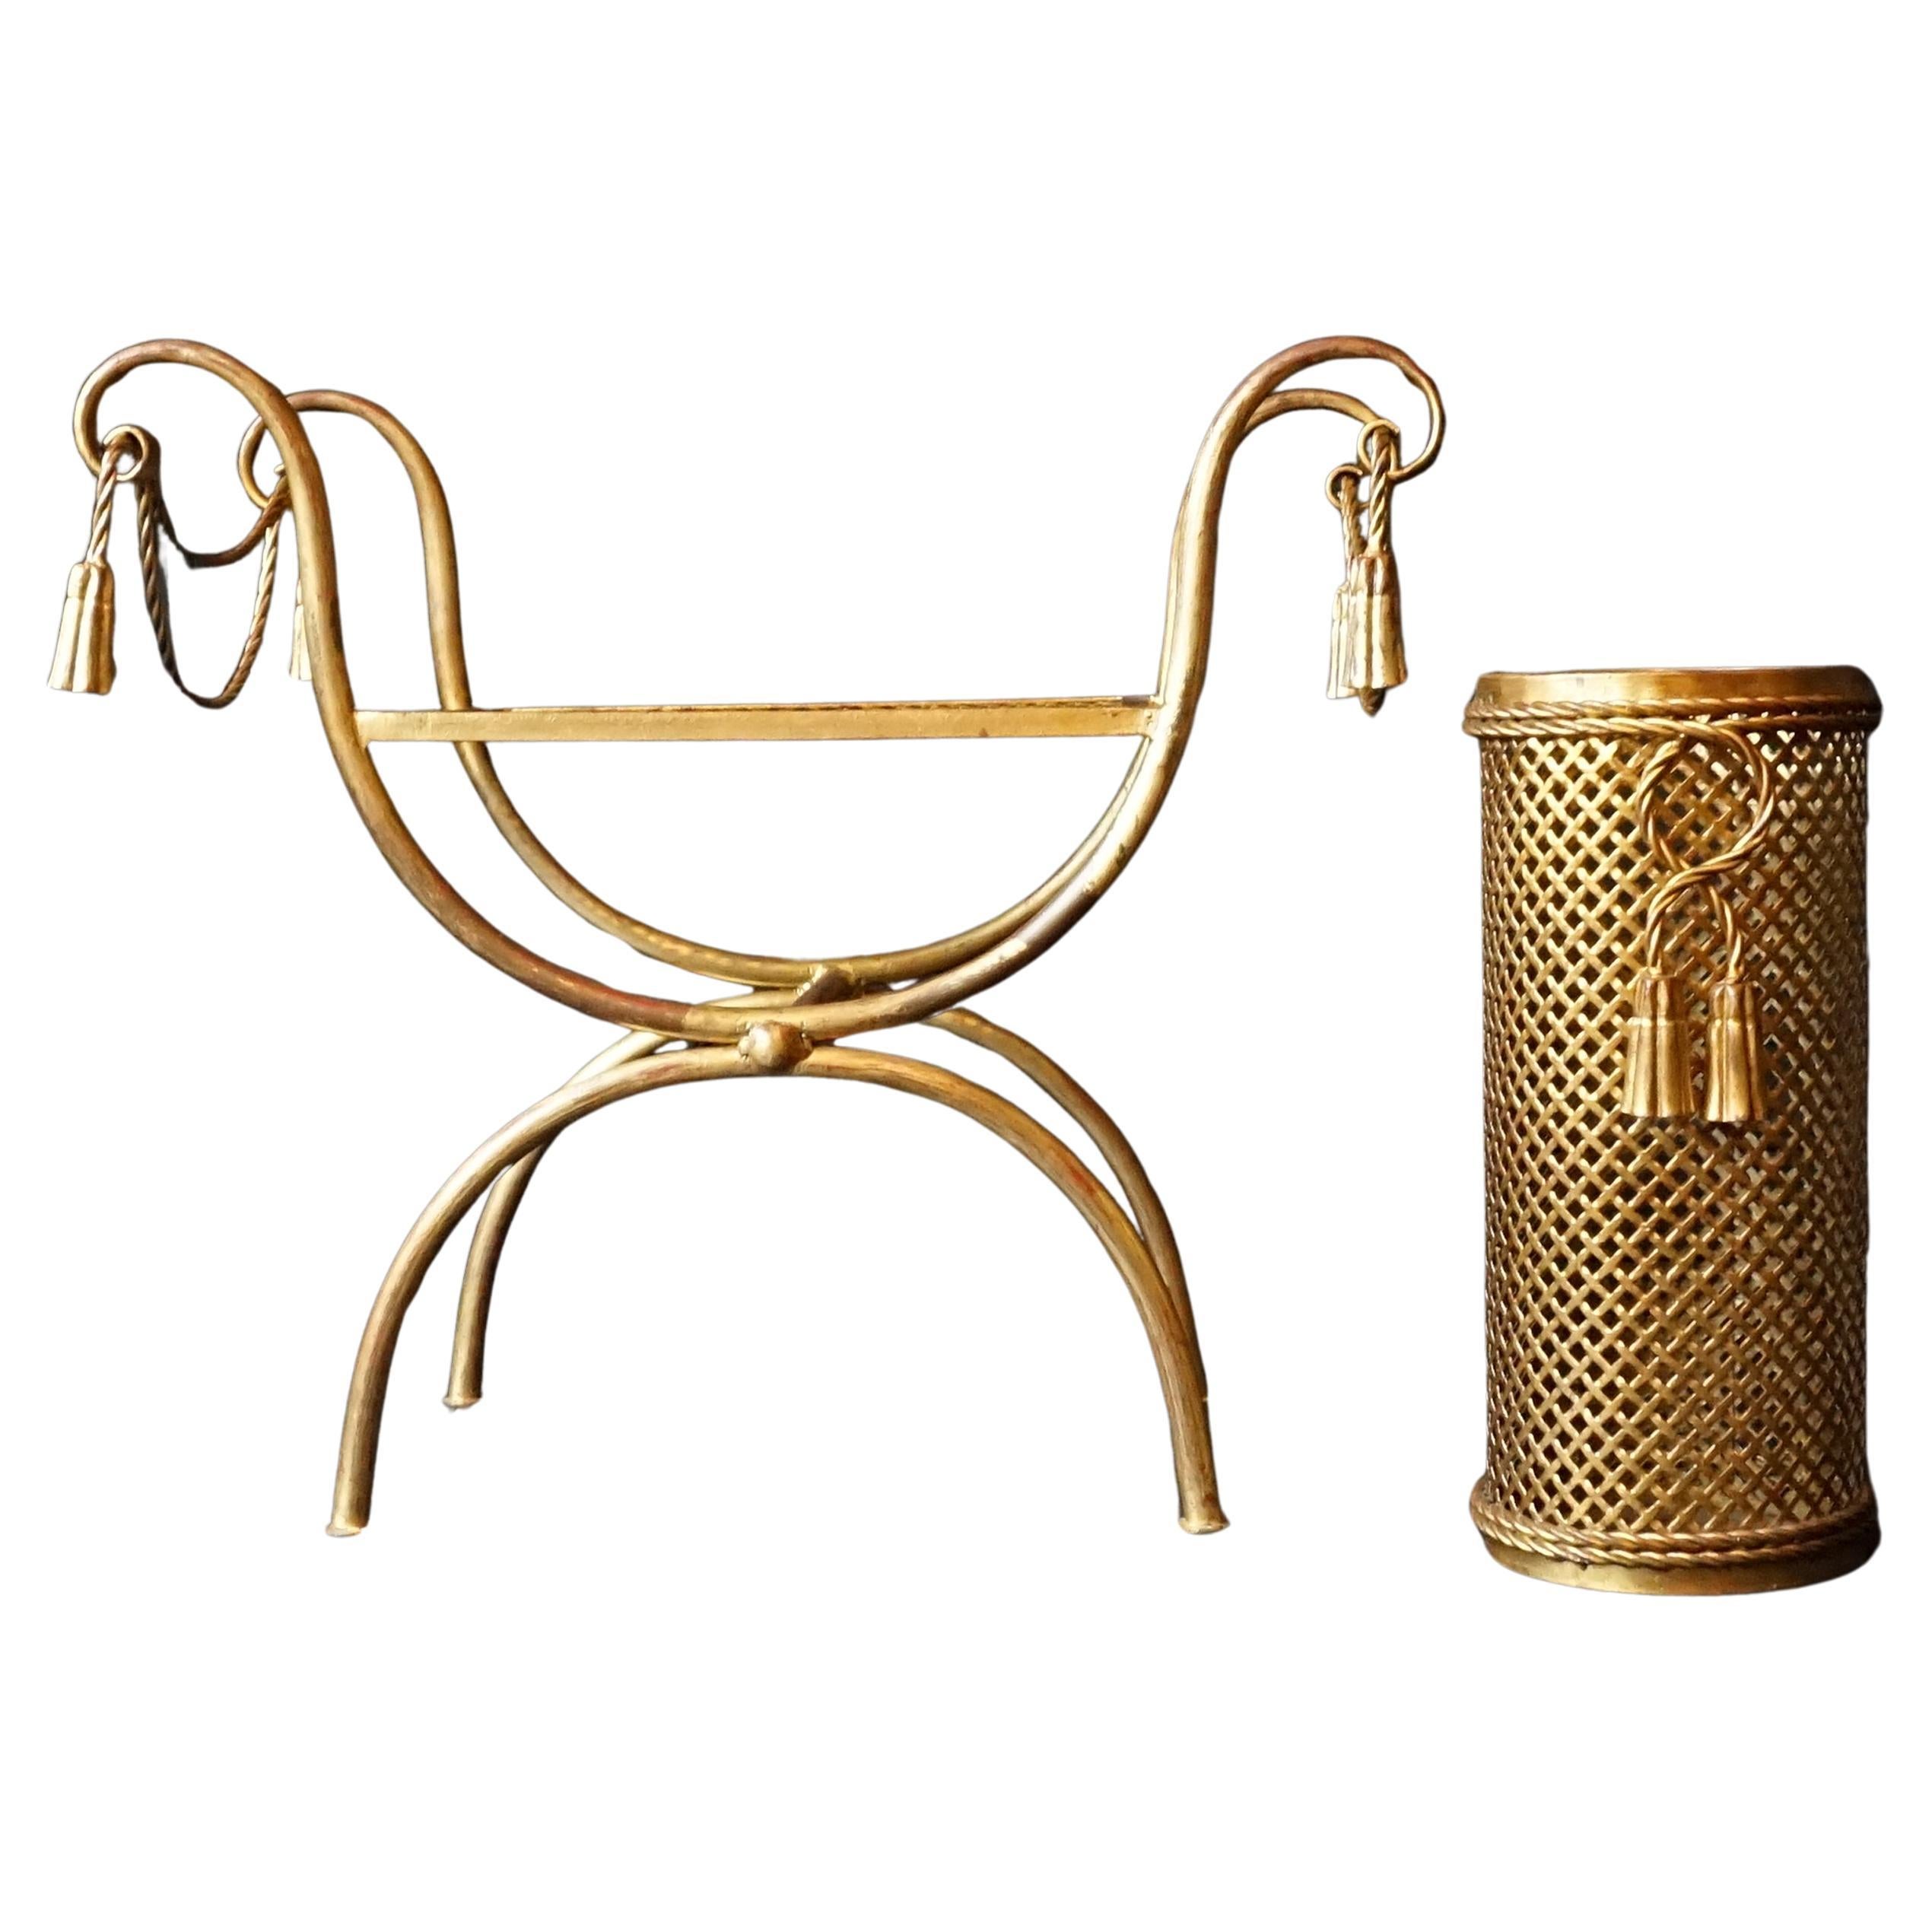 1950s Italian Midcentury Gilt Metal Rope and Tassel Stool and Umbrella Stand For Sale